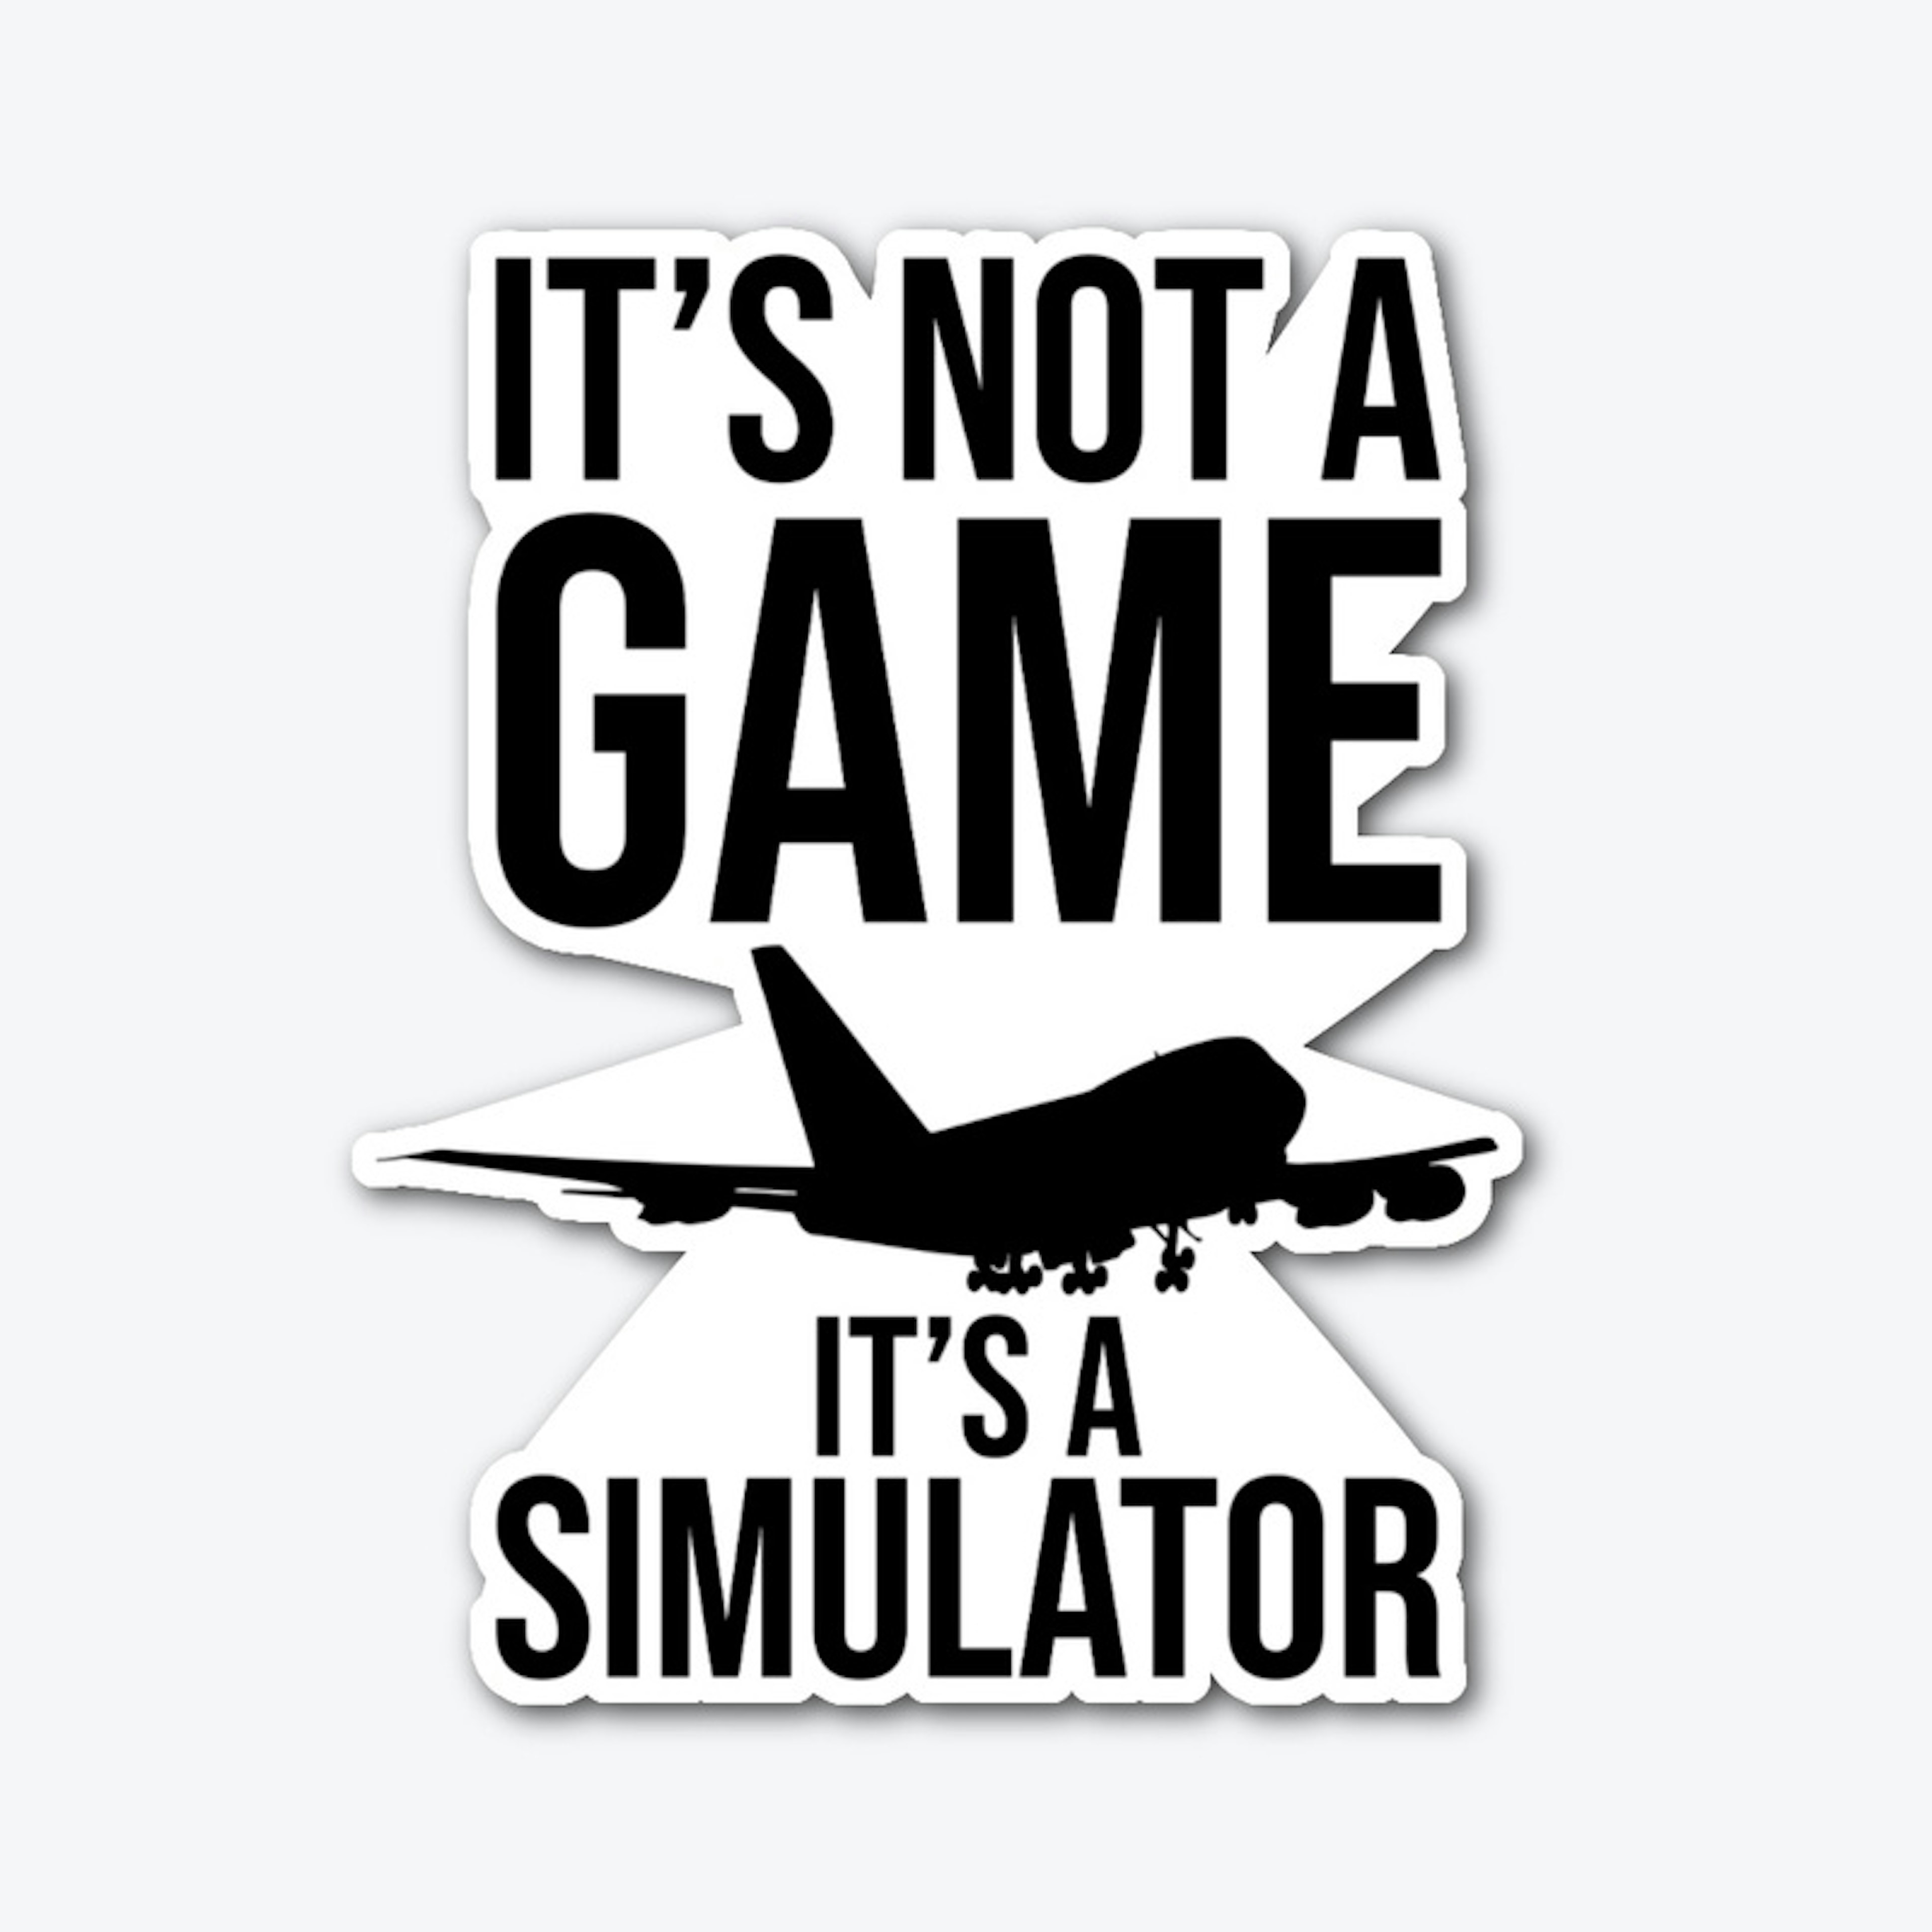 It's not a game, it's a simulator